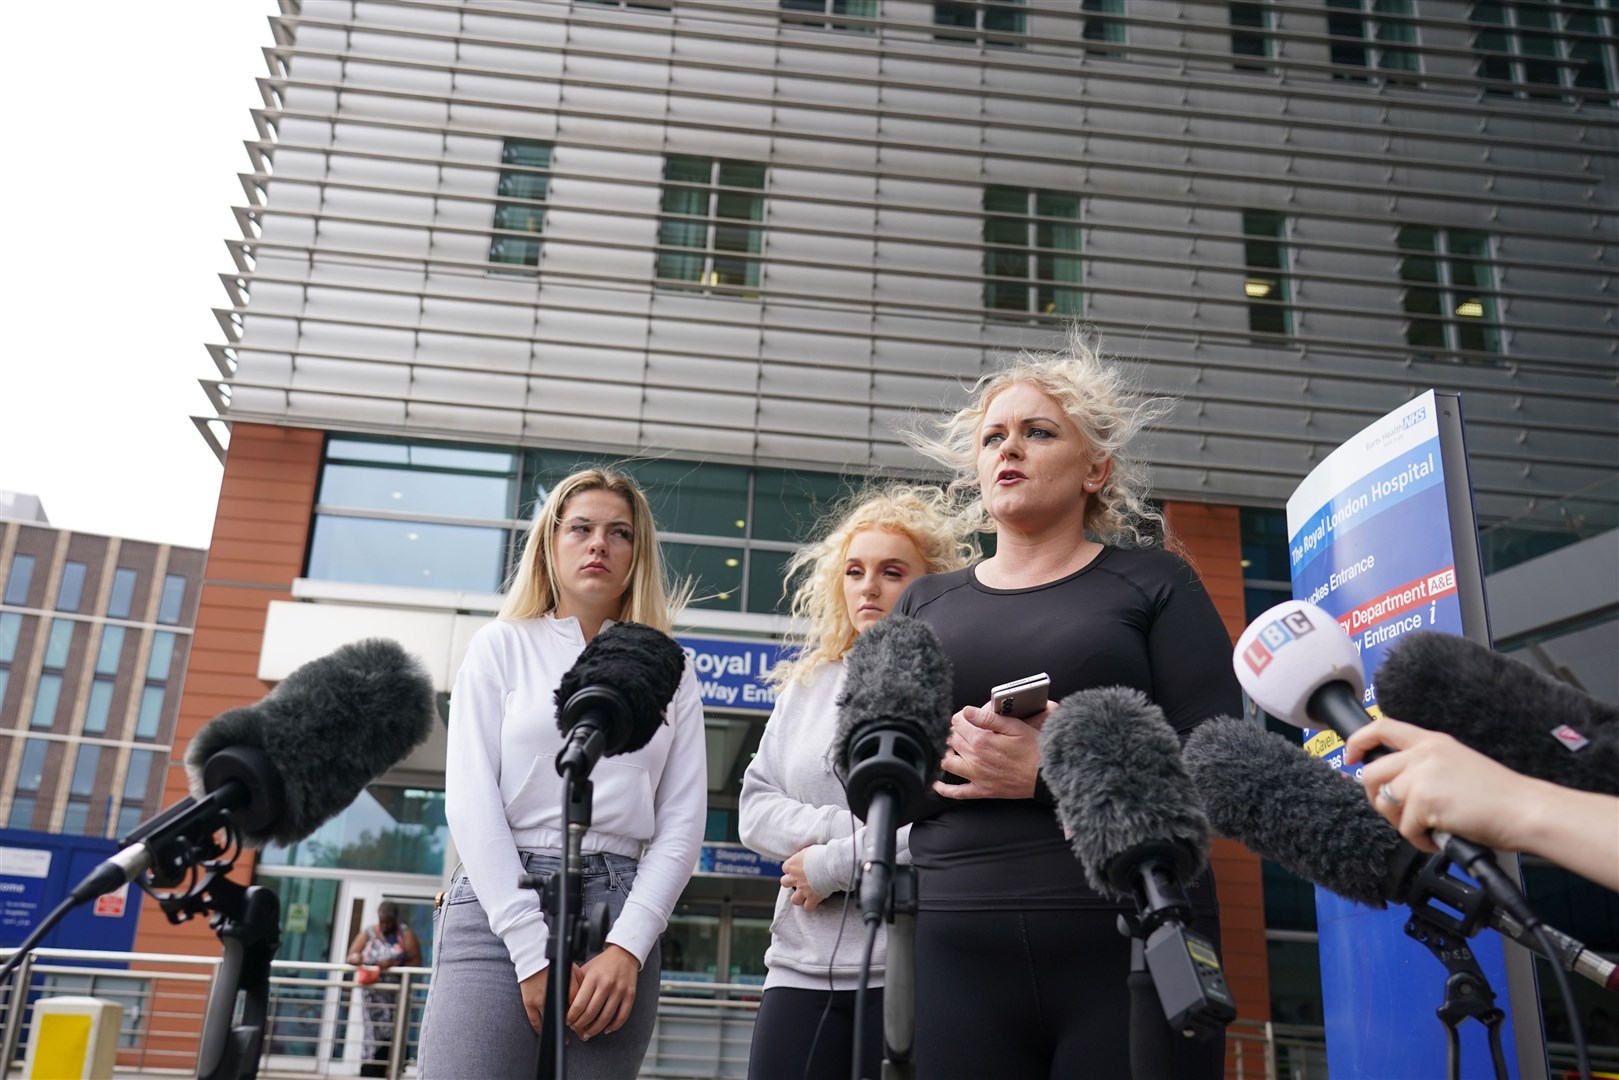 The mother of Archie Battersbee, Hollie Dance, right, speaks to the media outside the Royal London Hospital in Whitechapel, east London (Dominic Lipinski/PA)